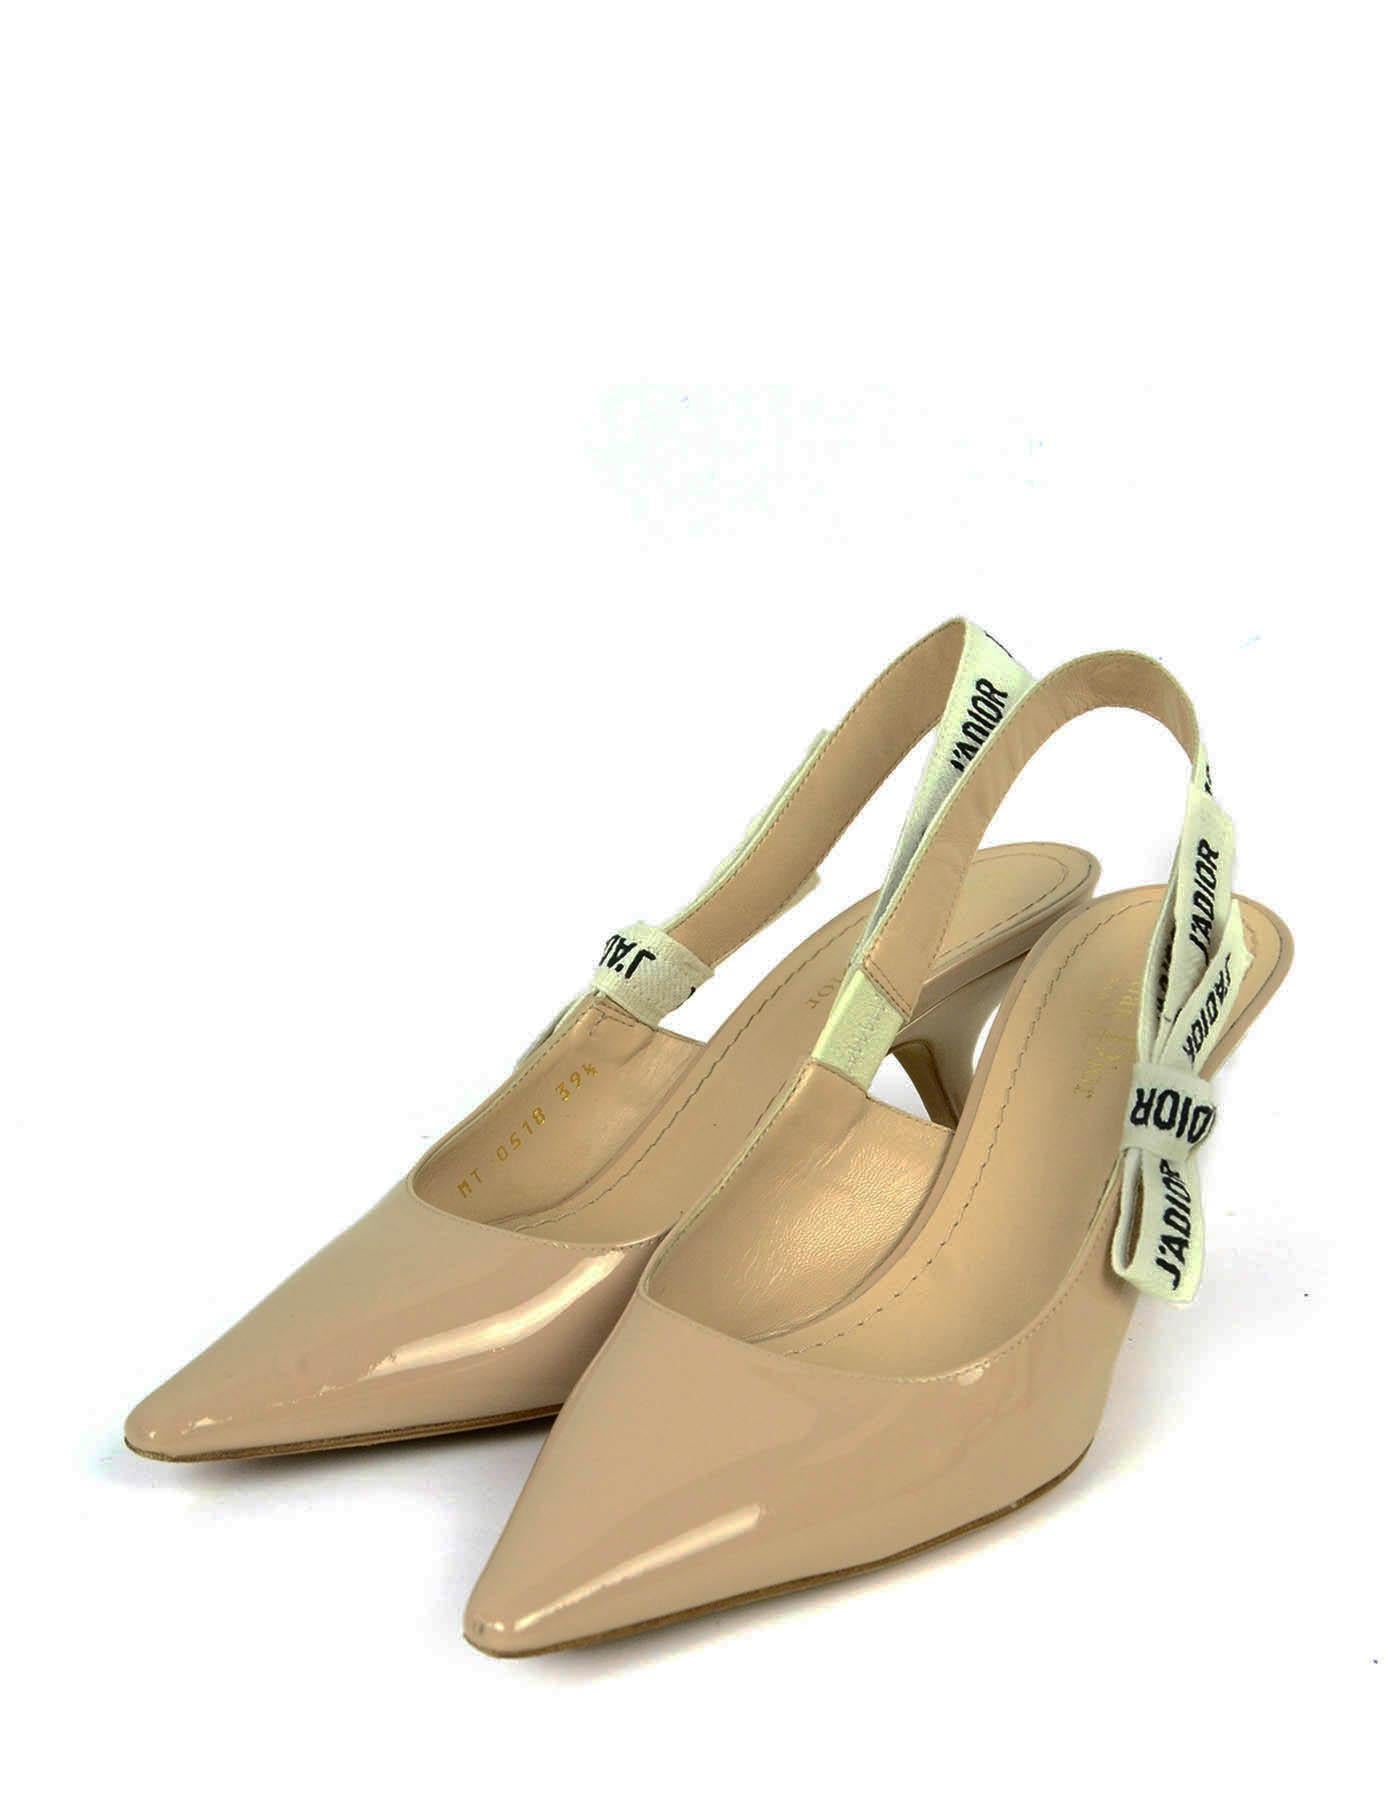 Christian Dior Nude Patent Calfskin Leather J’ADIOR Slingback Pumps

Made In: Italy
Color: Nude
Materials: Patent leather, fabric ribbon
Closure/Opening: Slingback
Overall Condition: Excellent with the exception of light wear to sole, and small